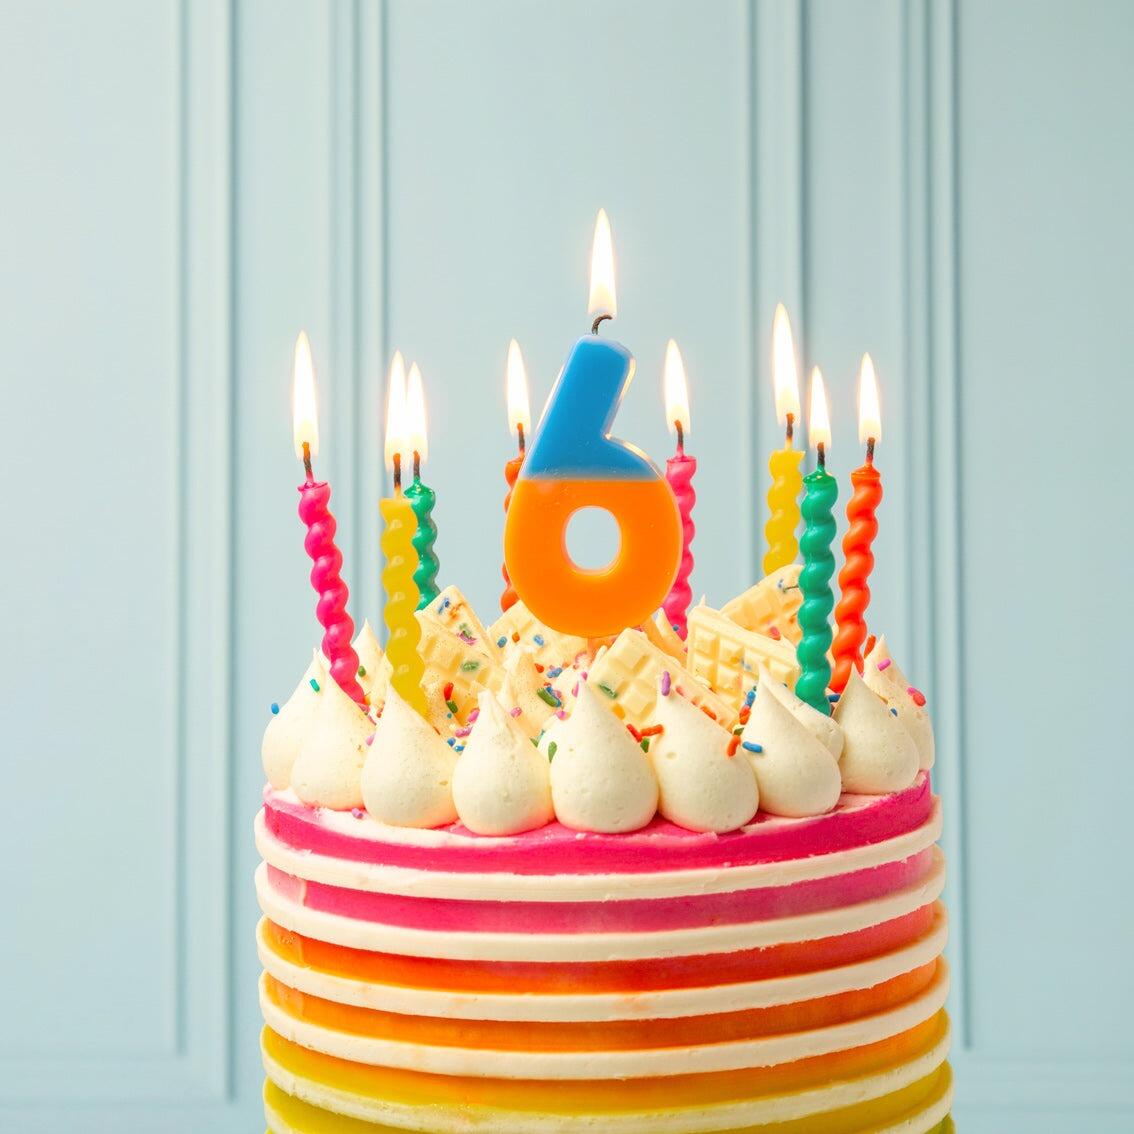 Bright birthday cake with candles